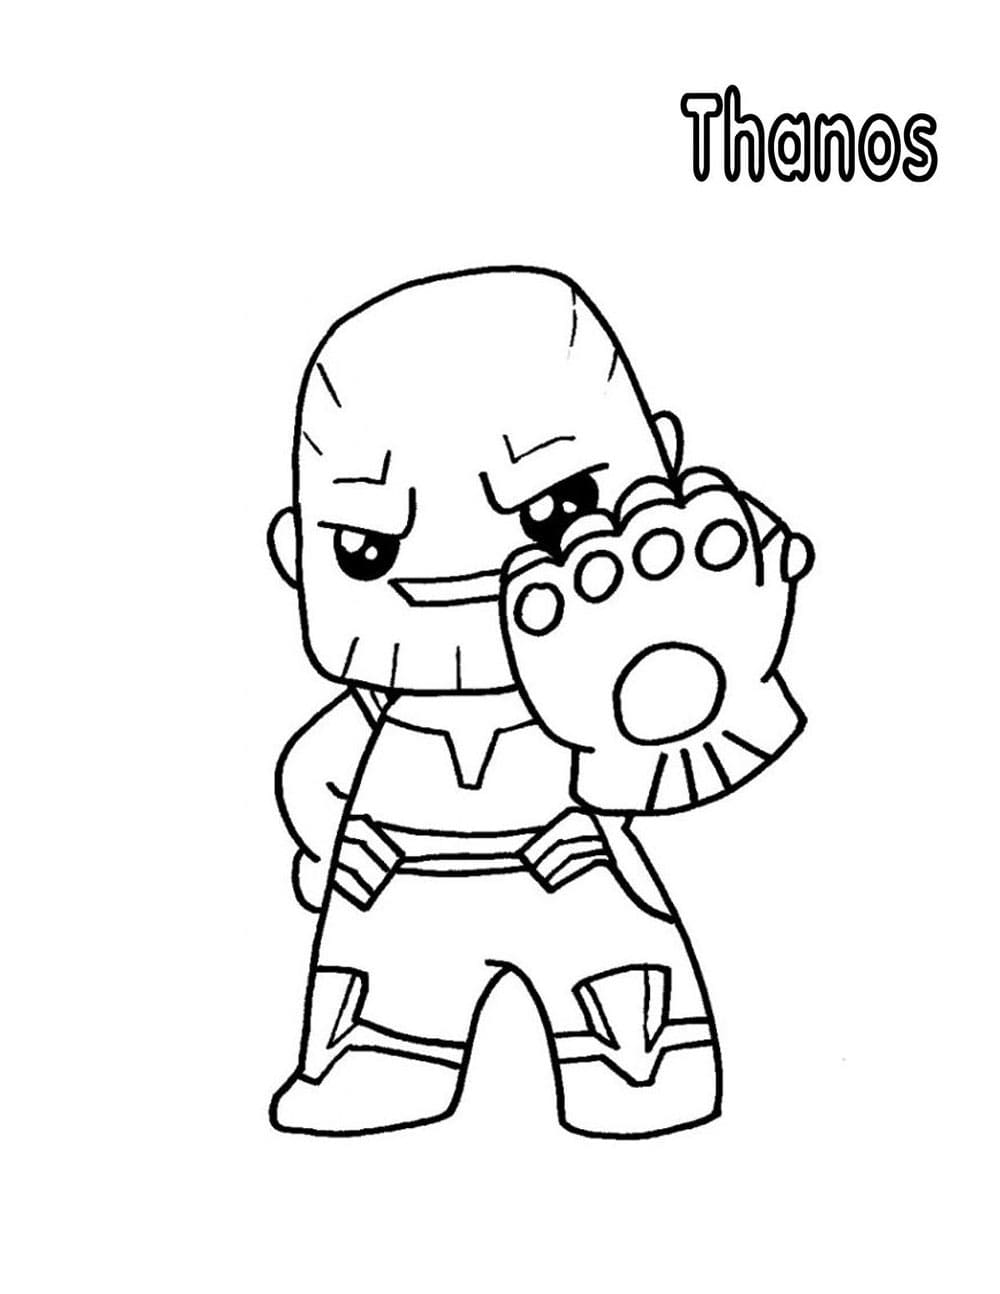 Smiling Cute Baby Thanos With Infinity Gauntlet From The Avengers Coloring Pages